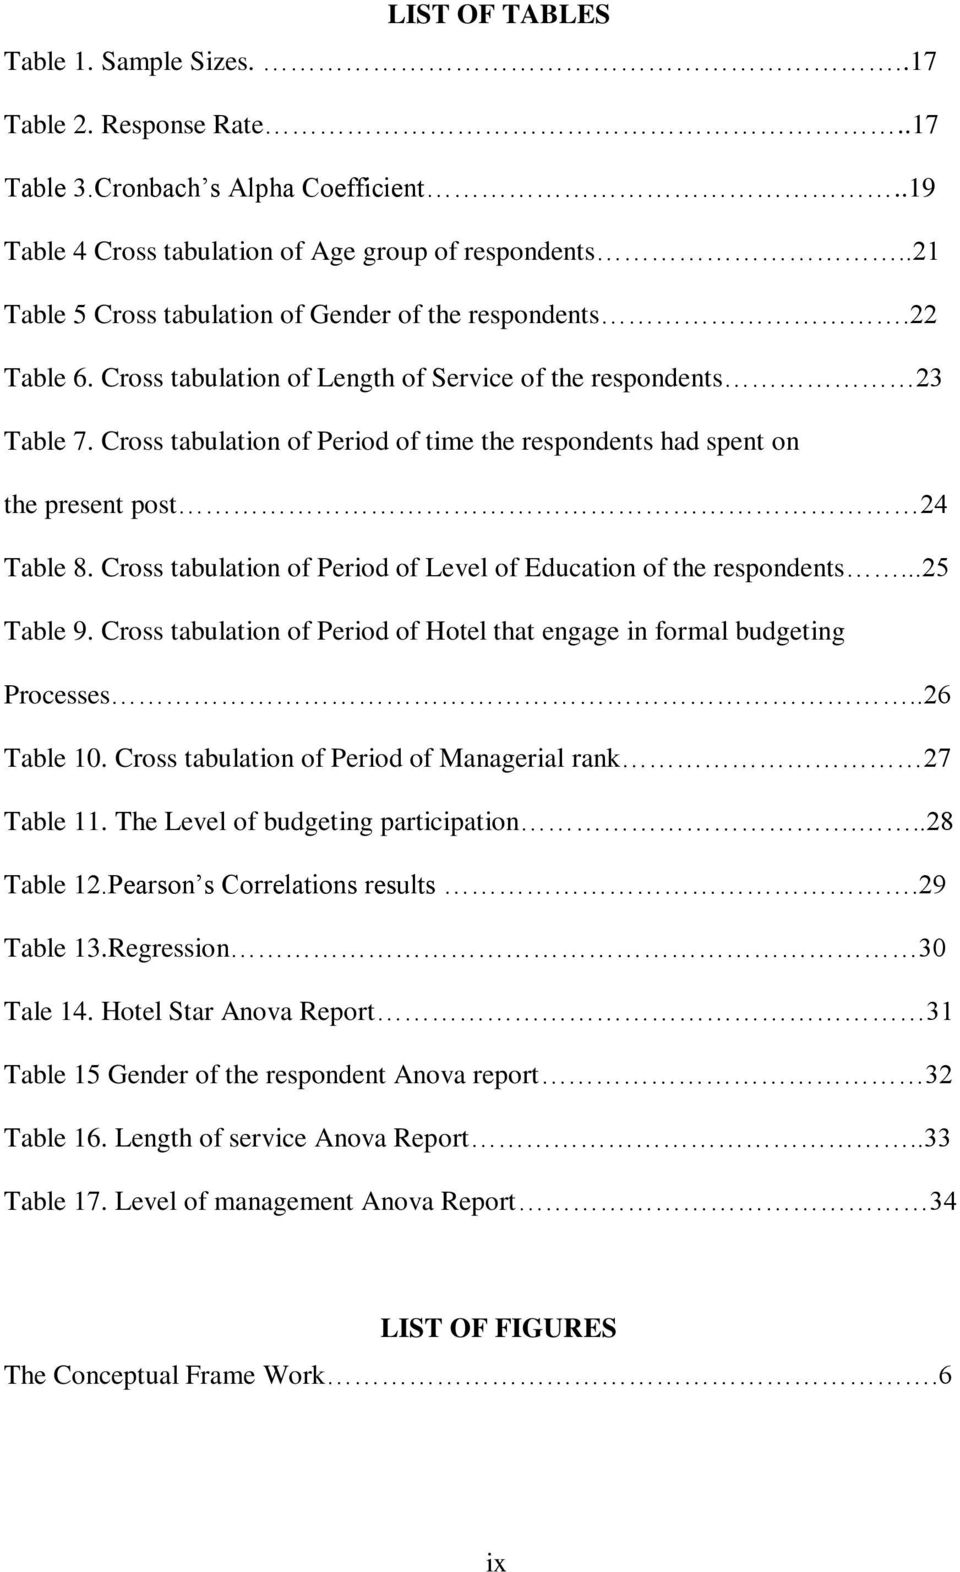 Cross tabulation of Period of time the respondents had spent on the present post 24 Table 8. Cross tabulation of Period of Level of Education of the respondents...25 Table 9.